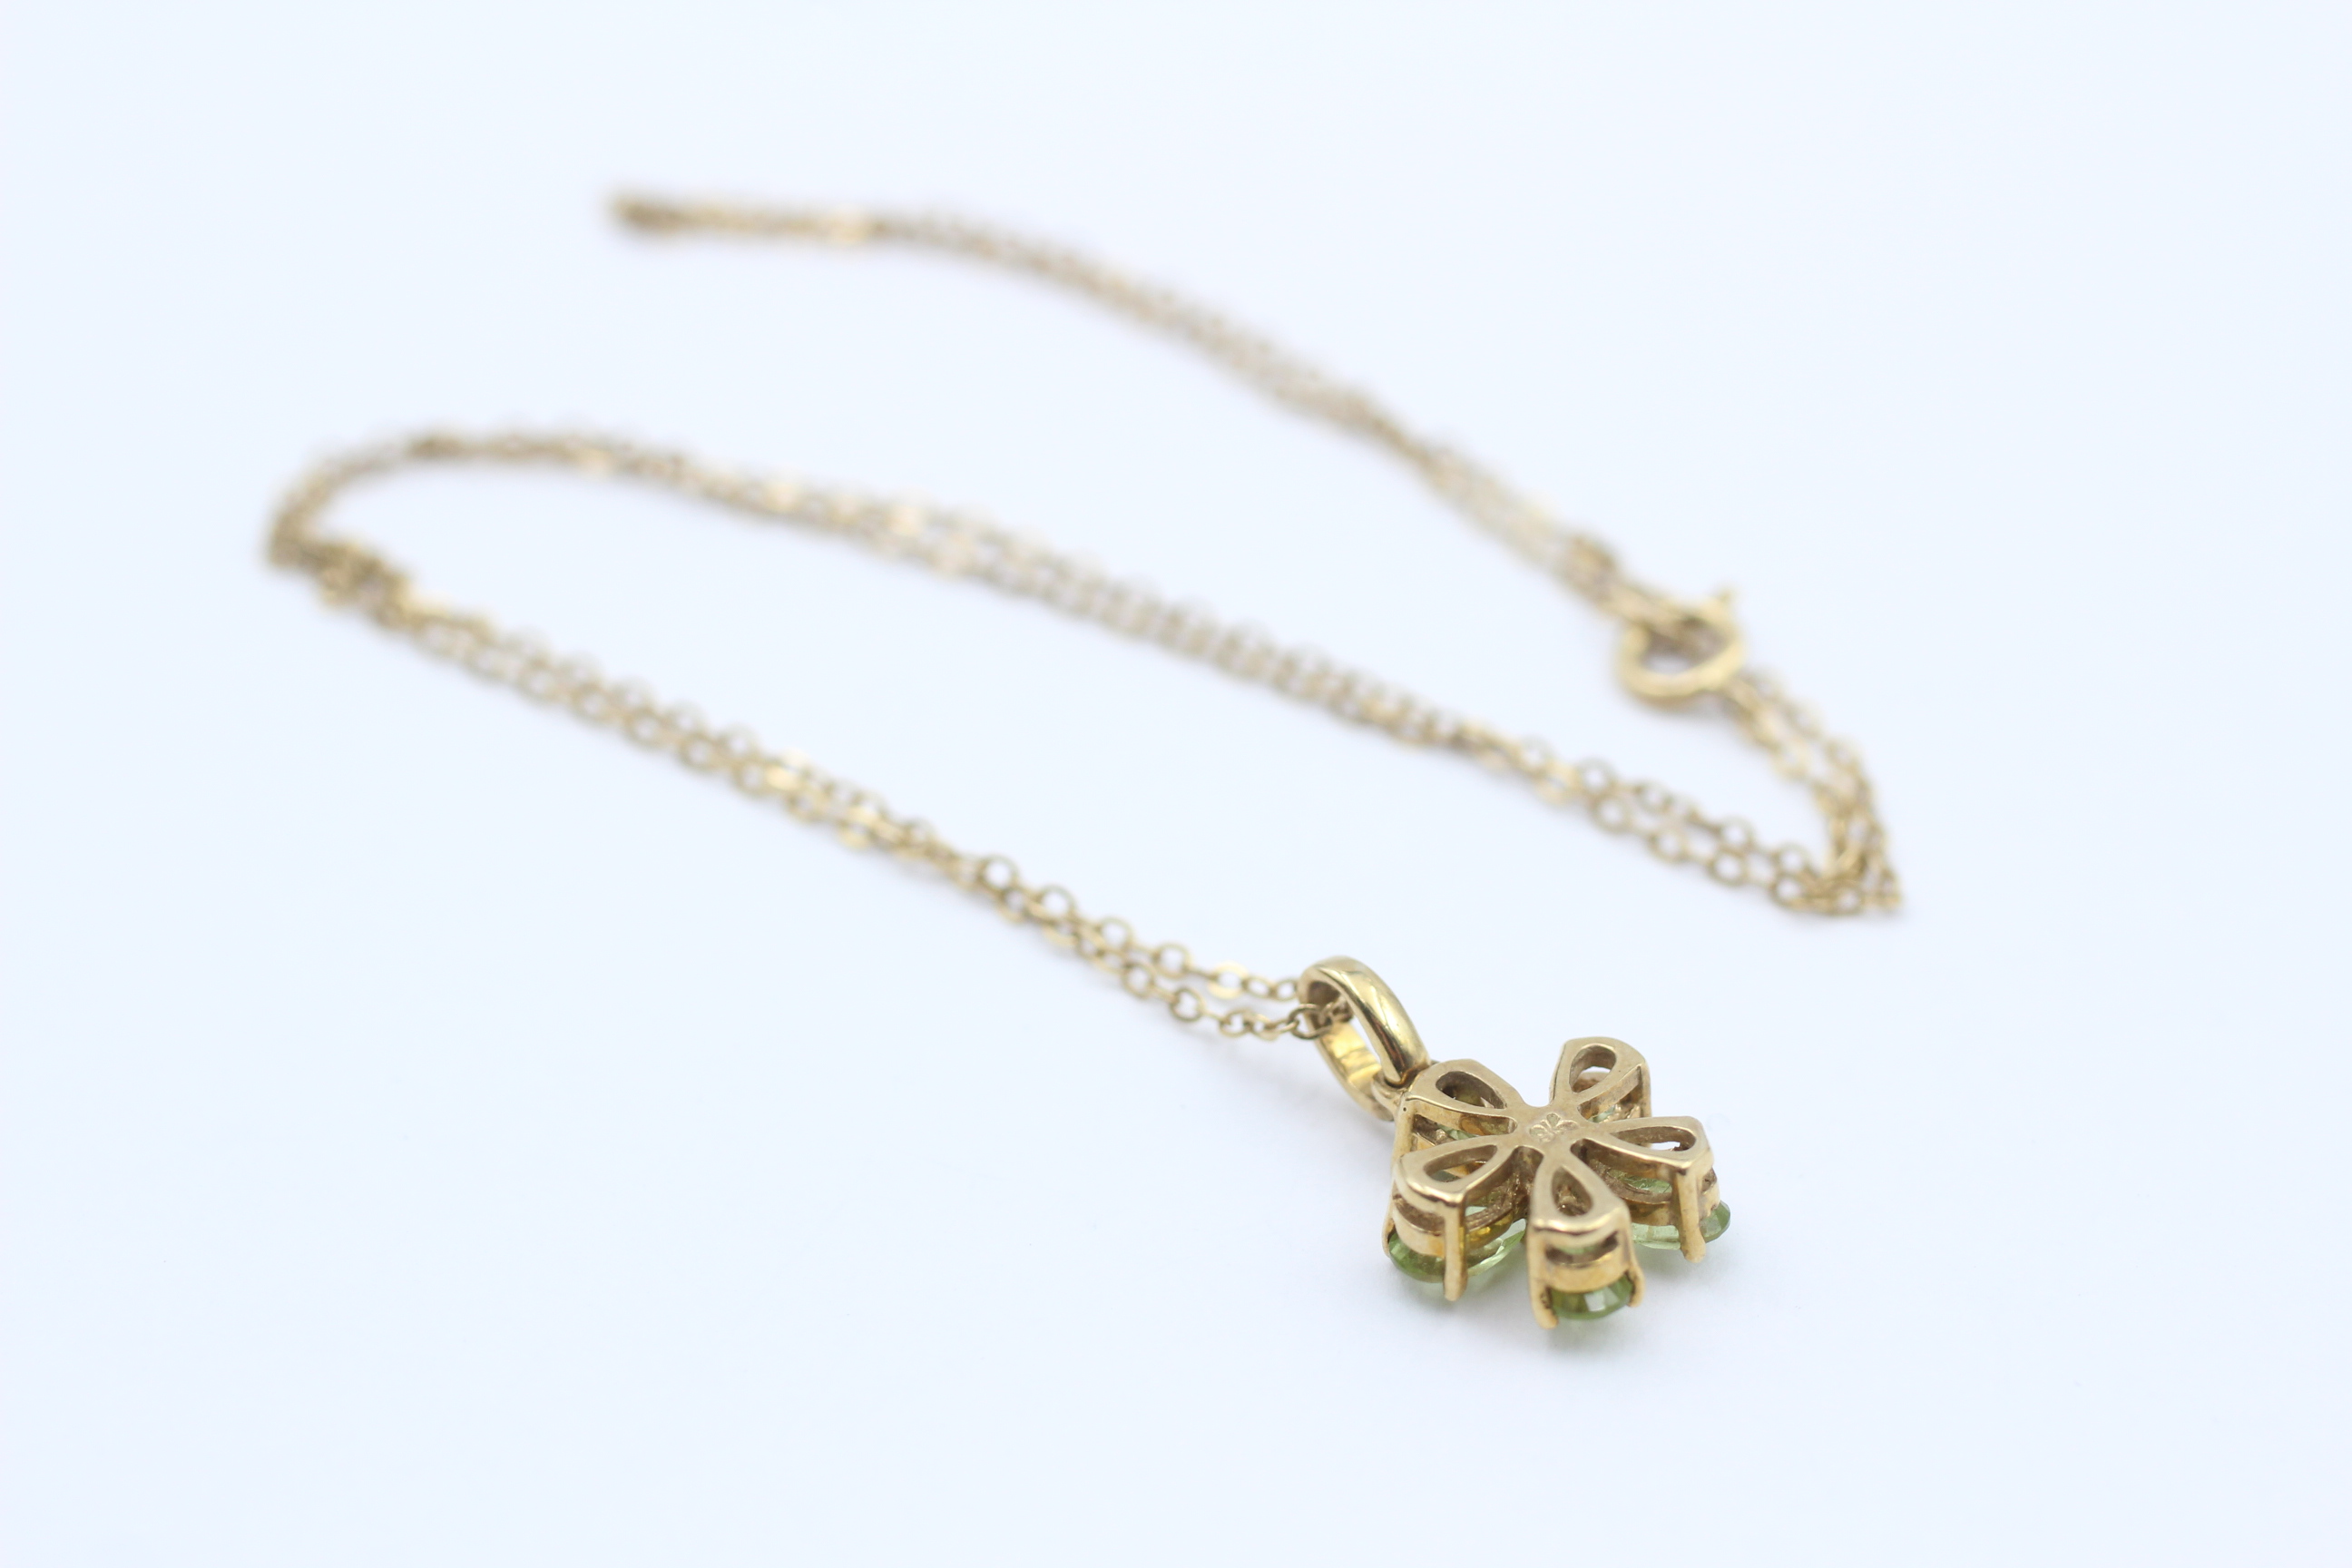 9ct Gold Green Gemstone Floral Pendant Necklace - Image 3 of 5